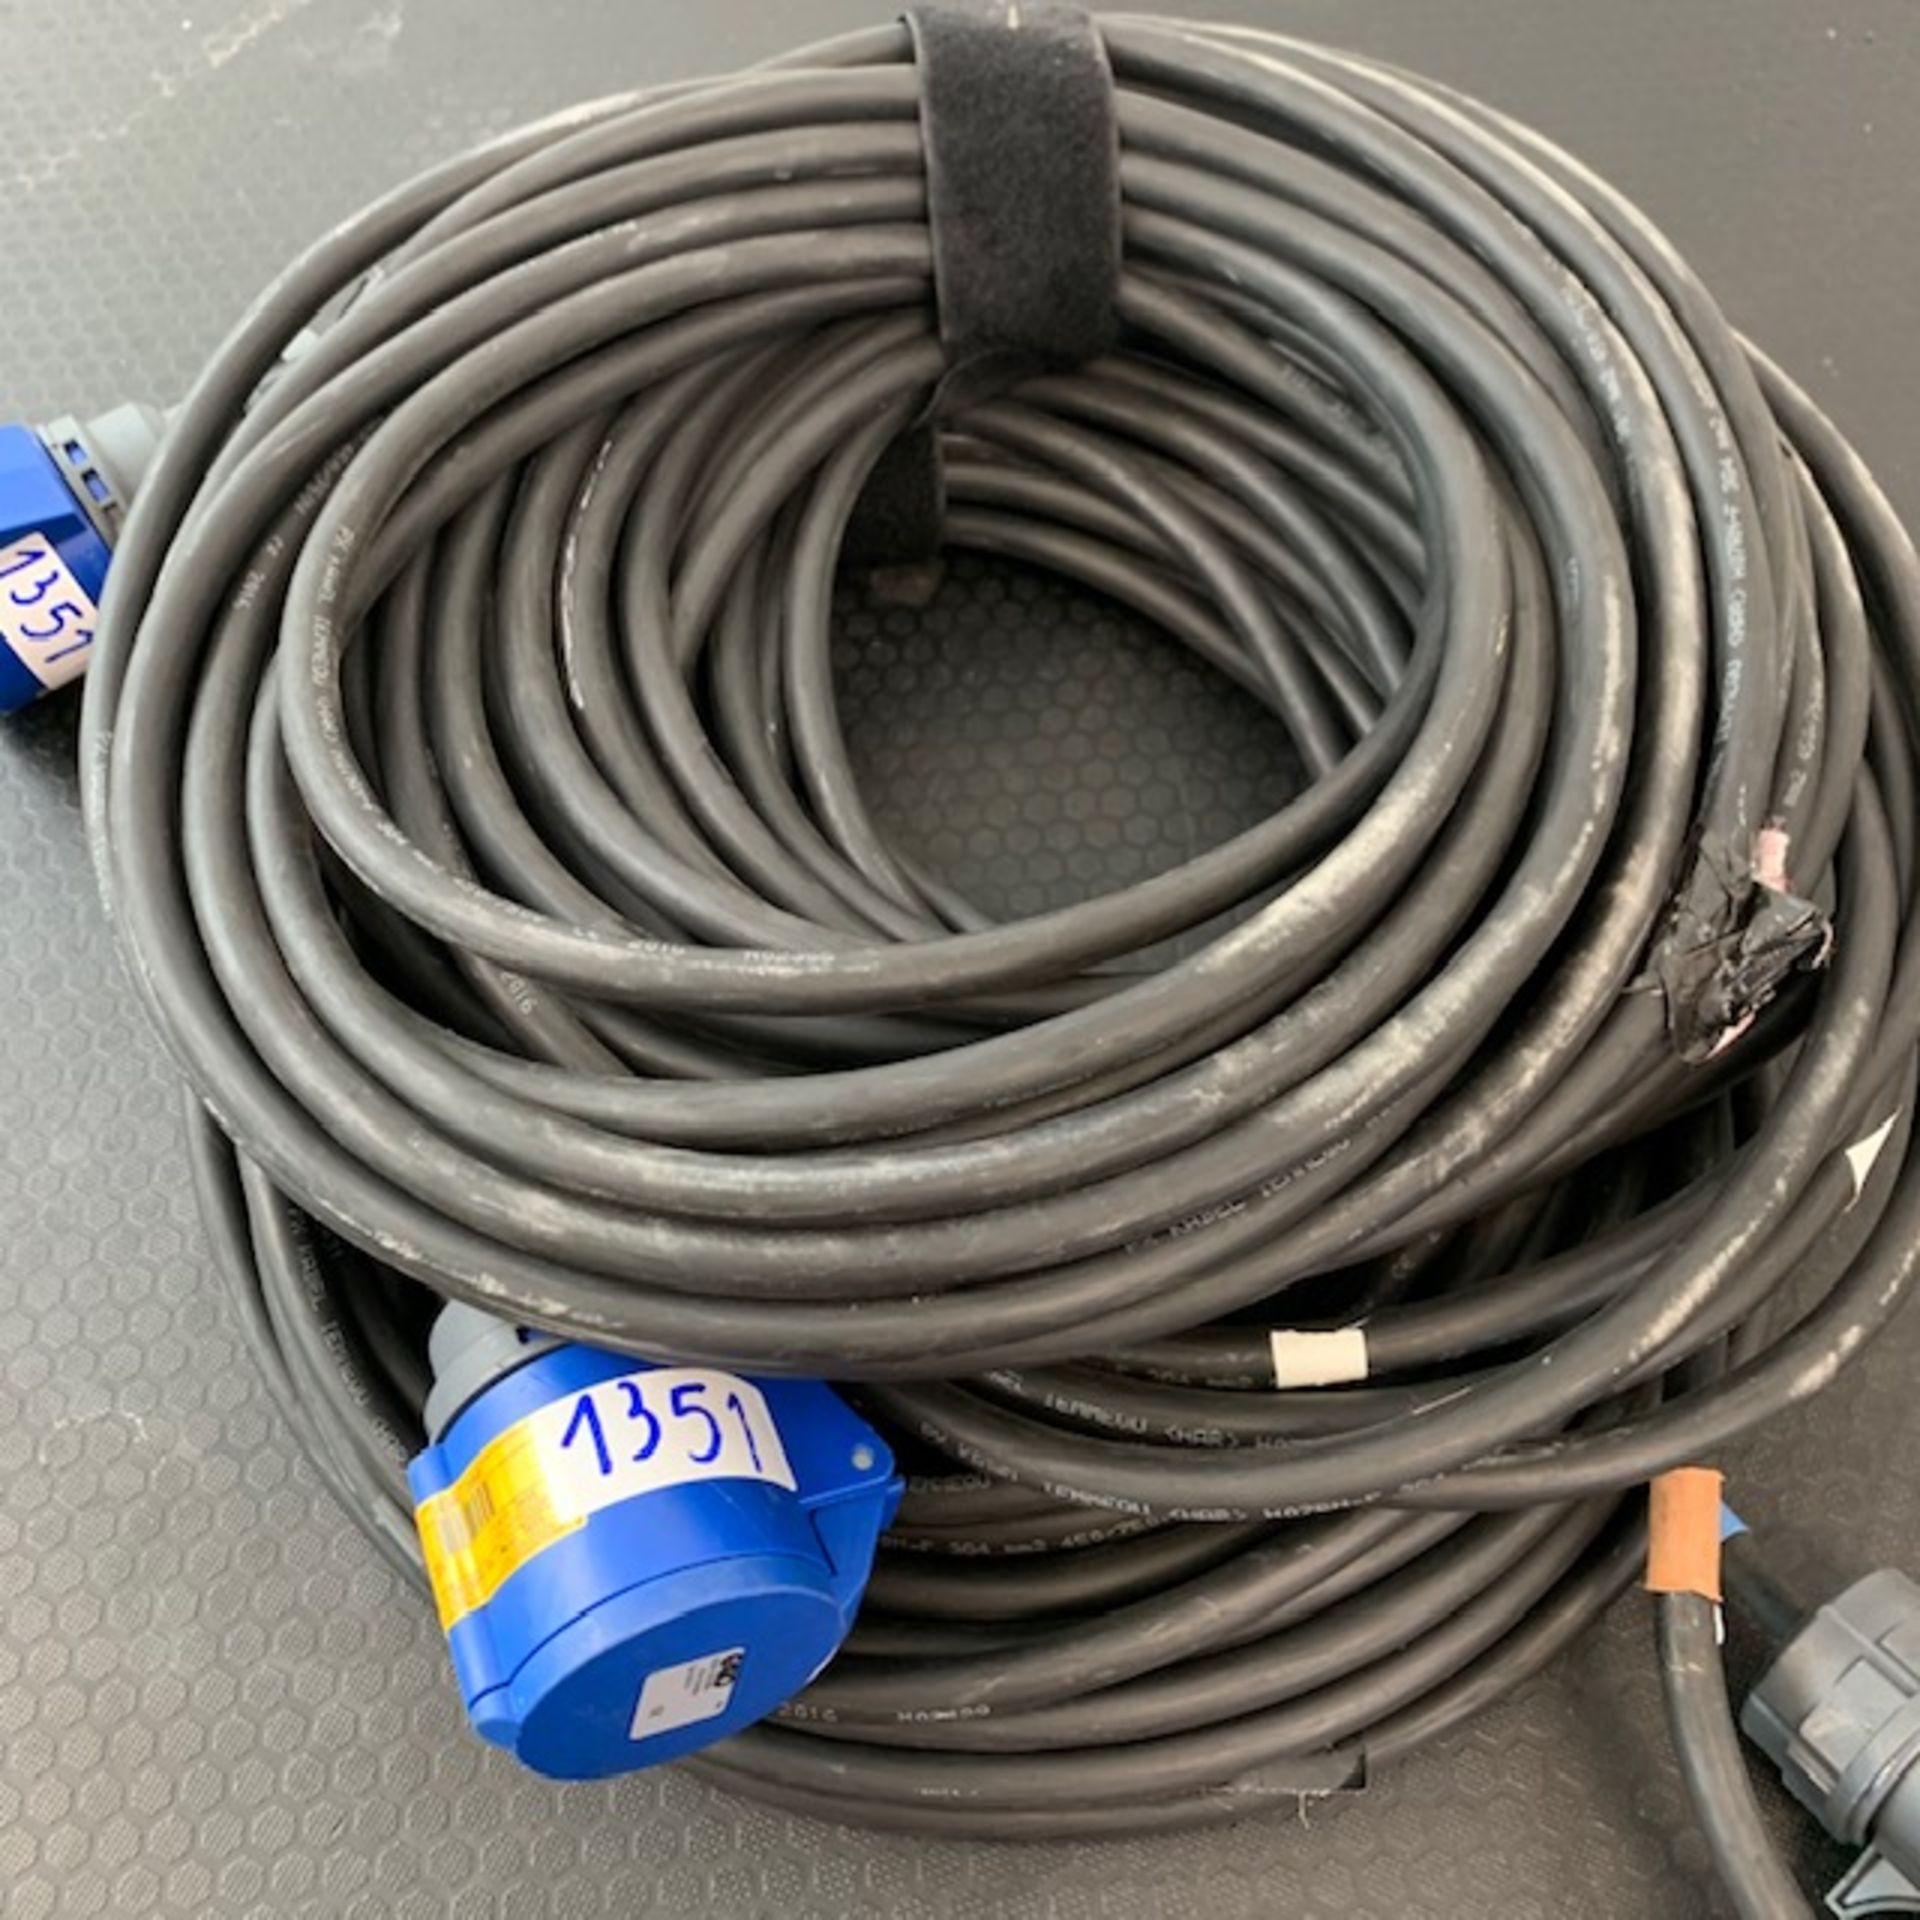 2 X 32Amp Single Phase 20M Cable - Ref: 1351 - CL581 - Location: Altrincham WA14Items will be